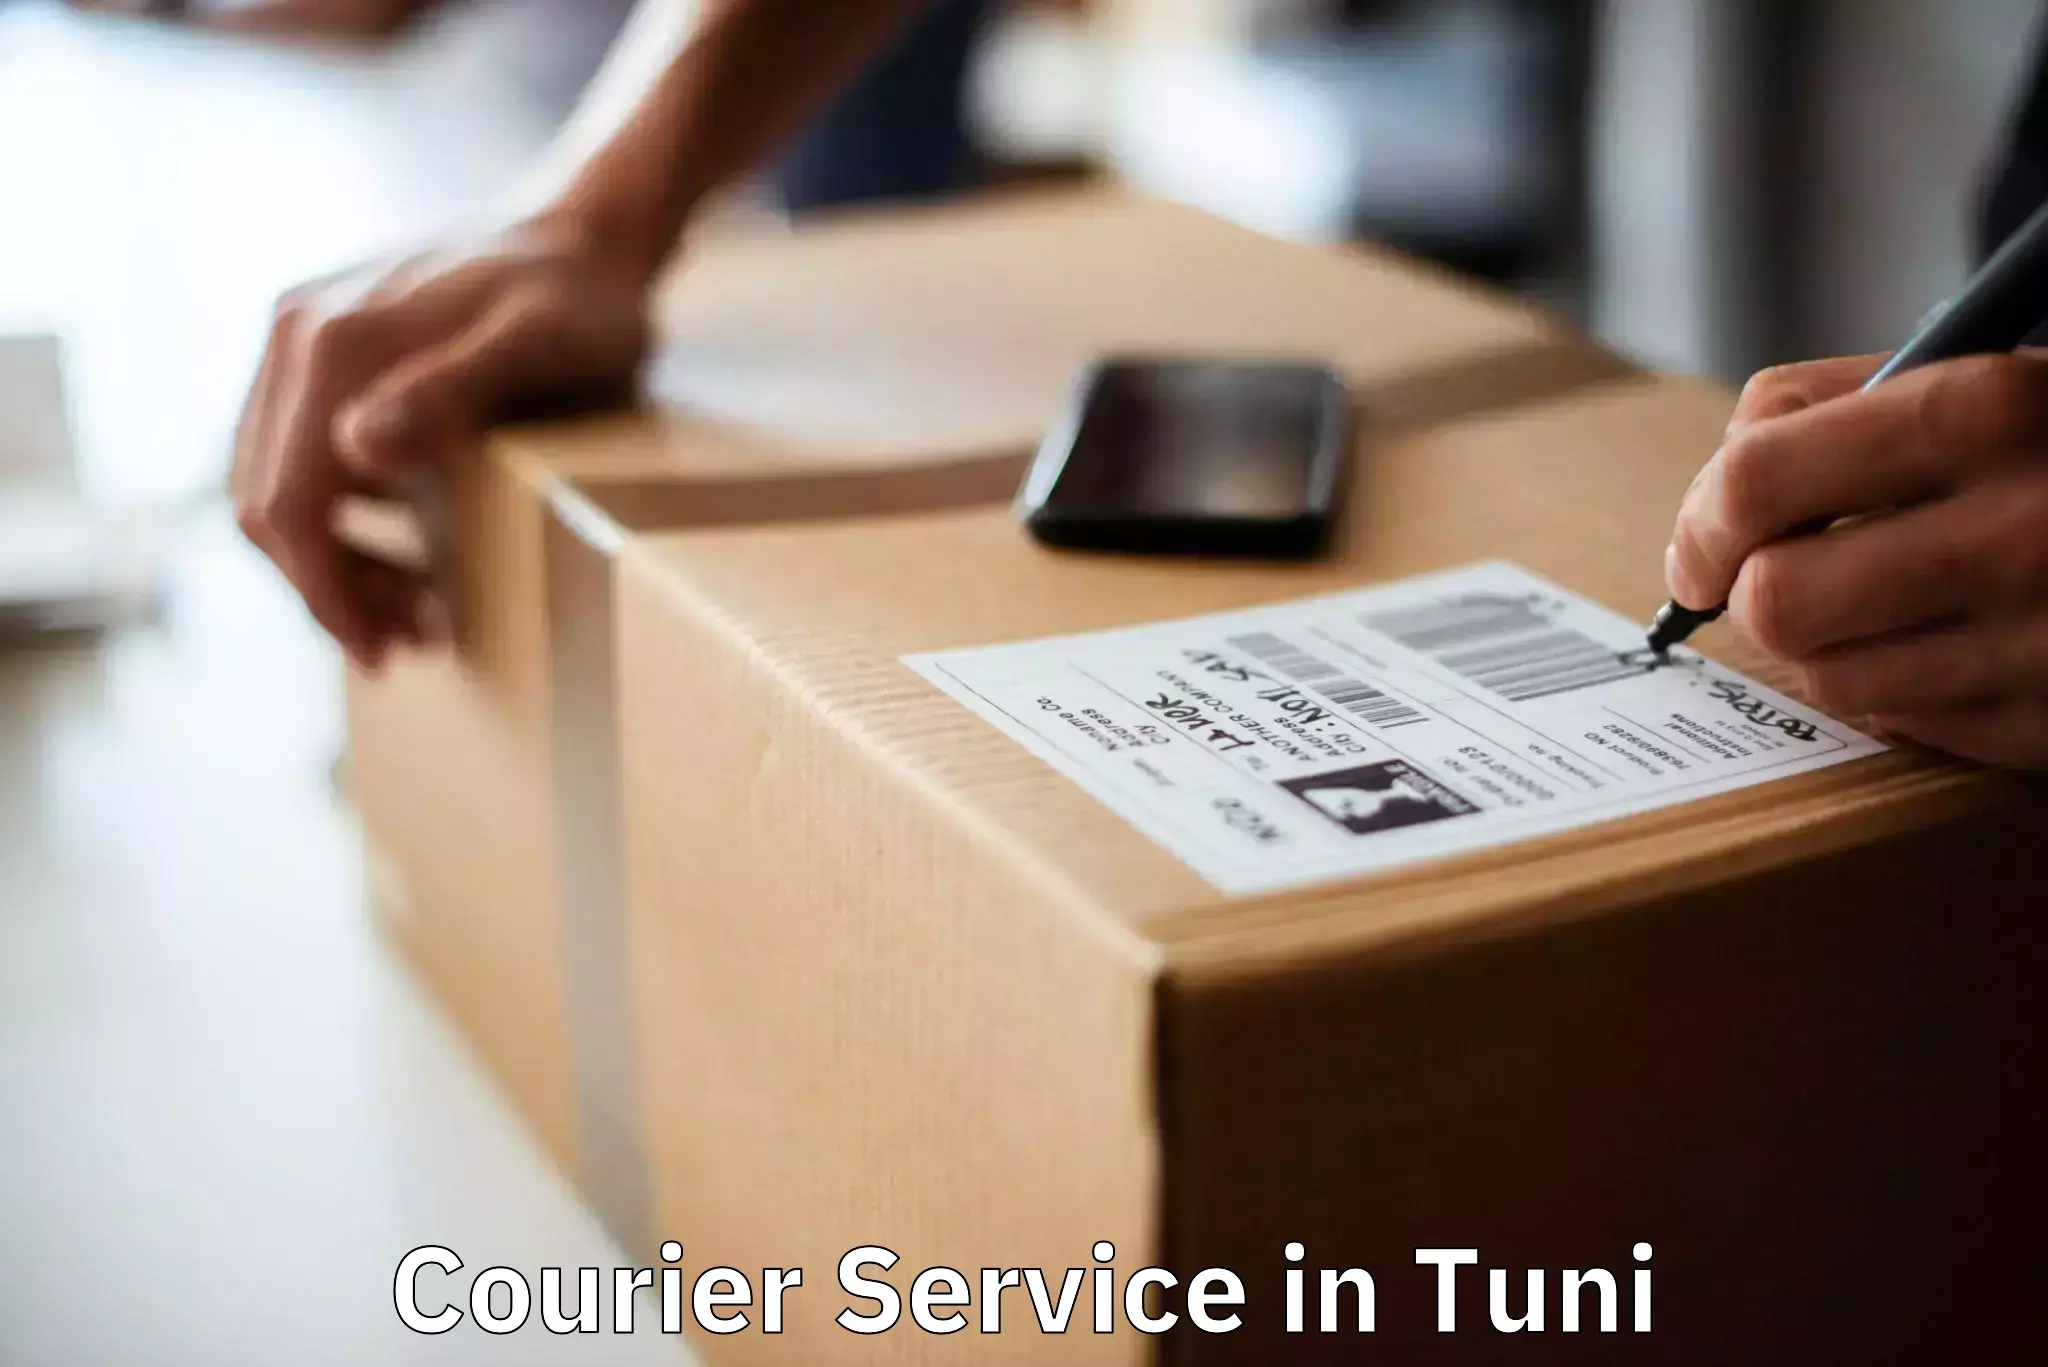 Parcel handling and care in Tuni